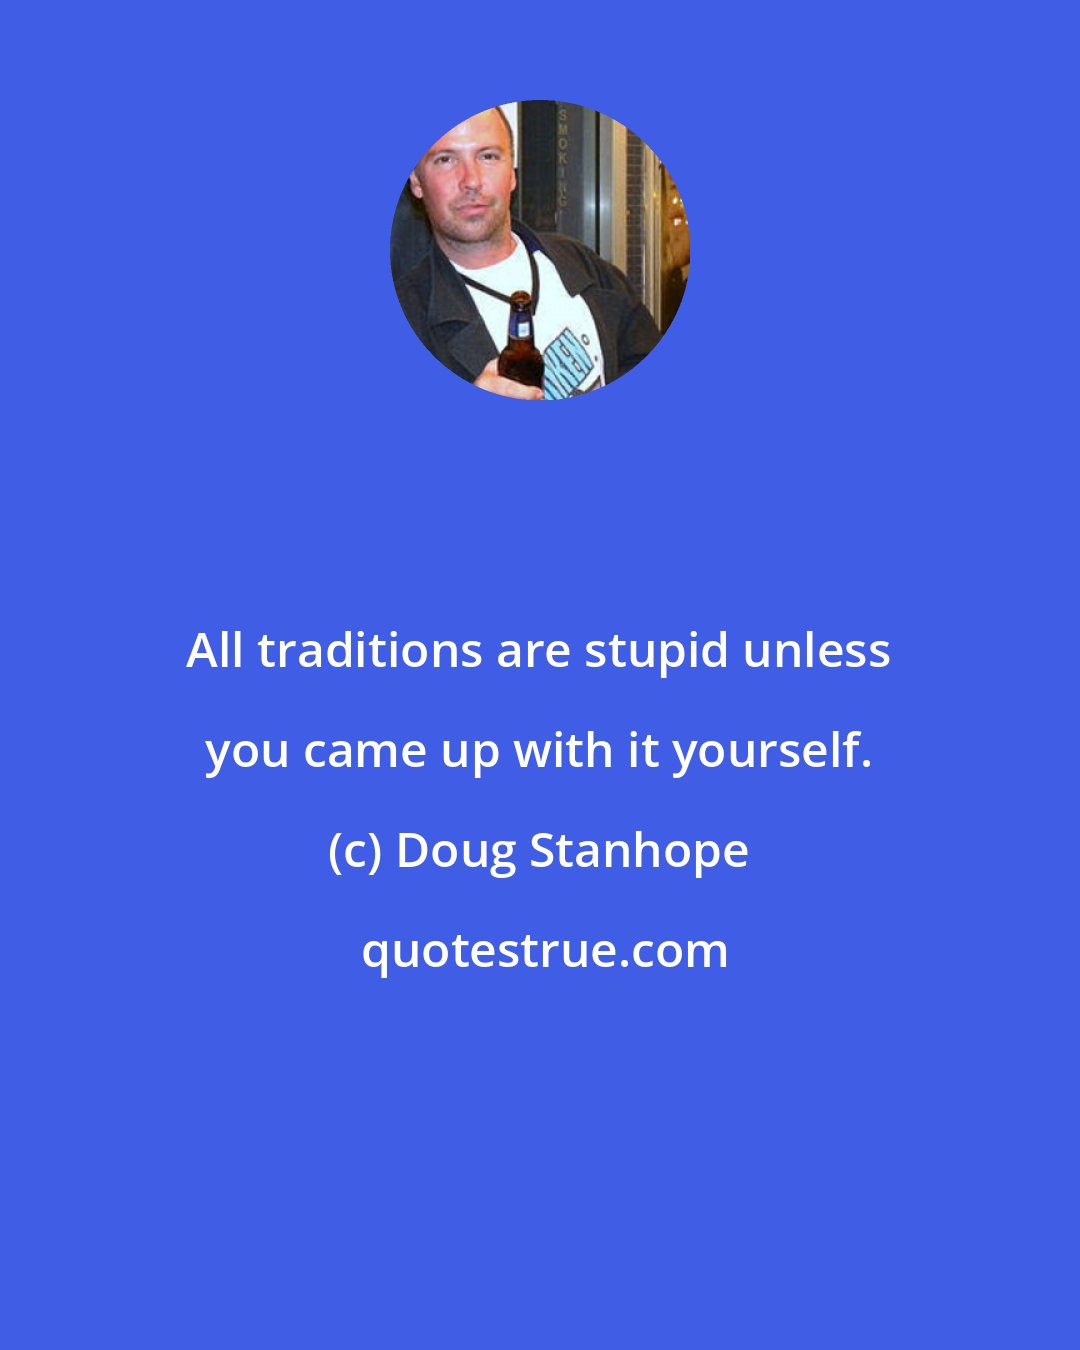 Doug Stanhope: All traditions are stupid unless you came up with it yourself.